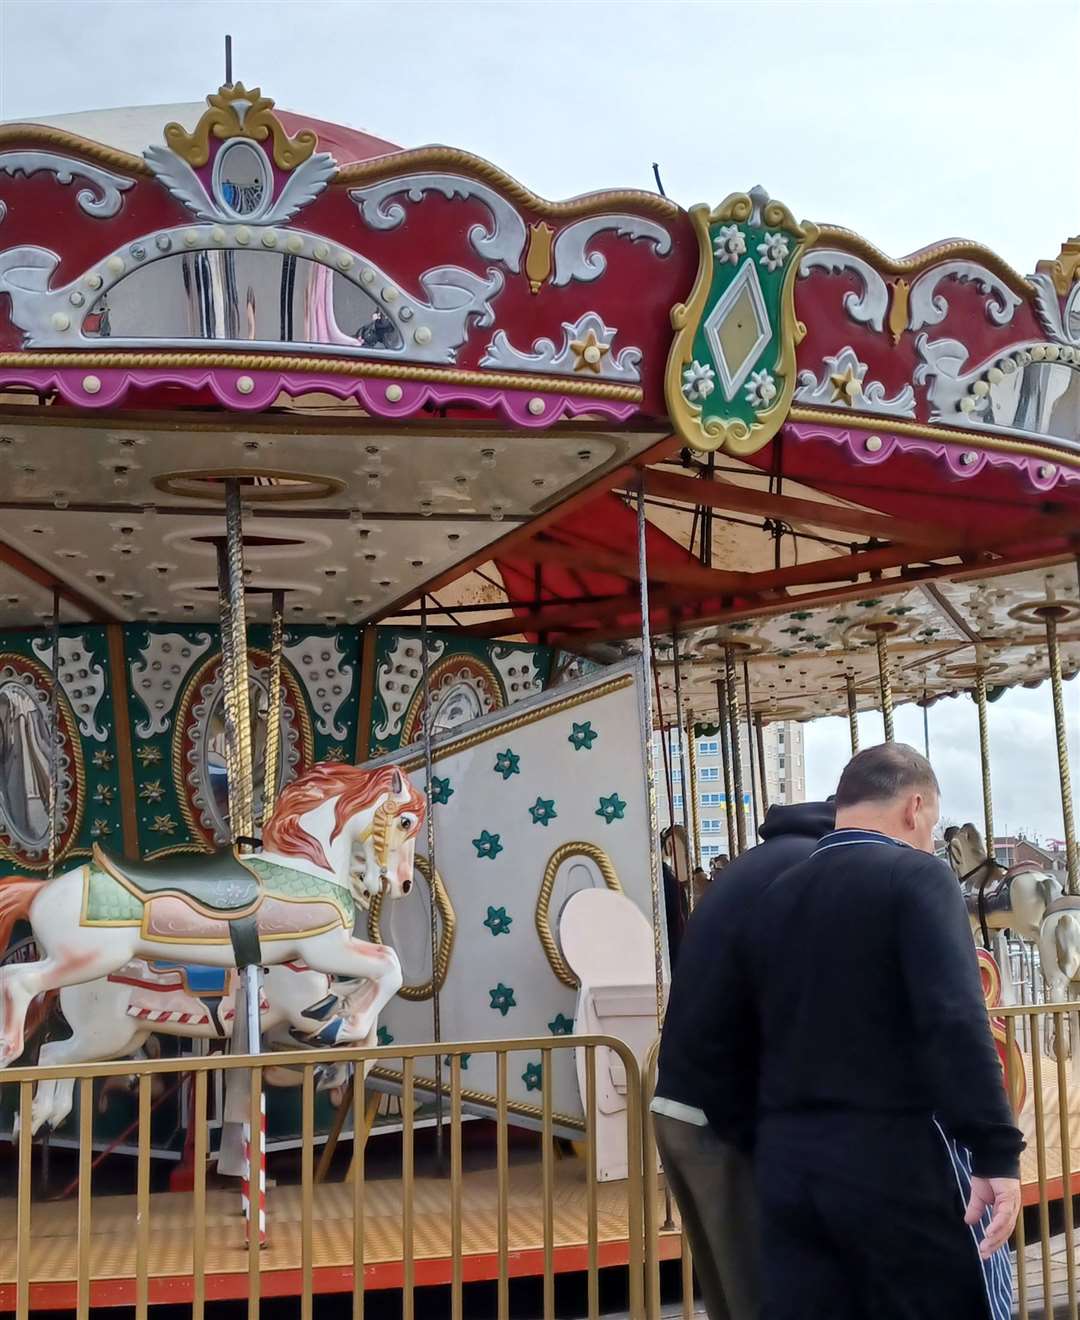 A section of the roof of the carousel collapsed. Picture: Bob Keen